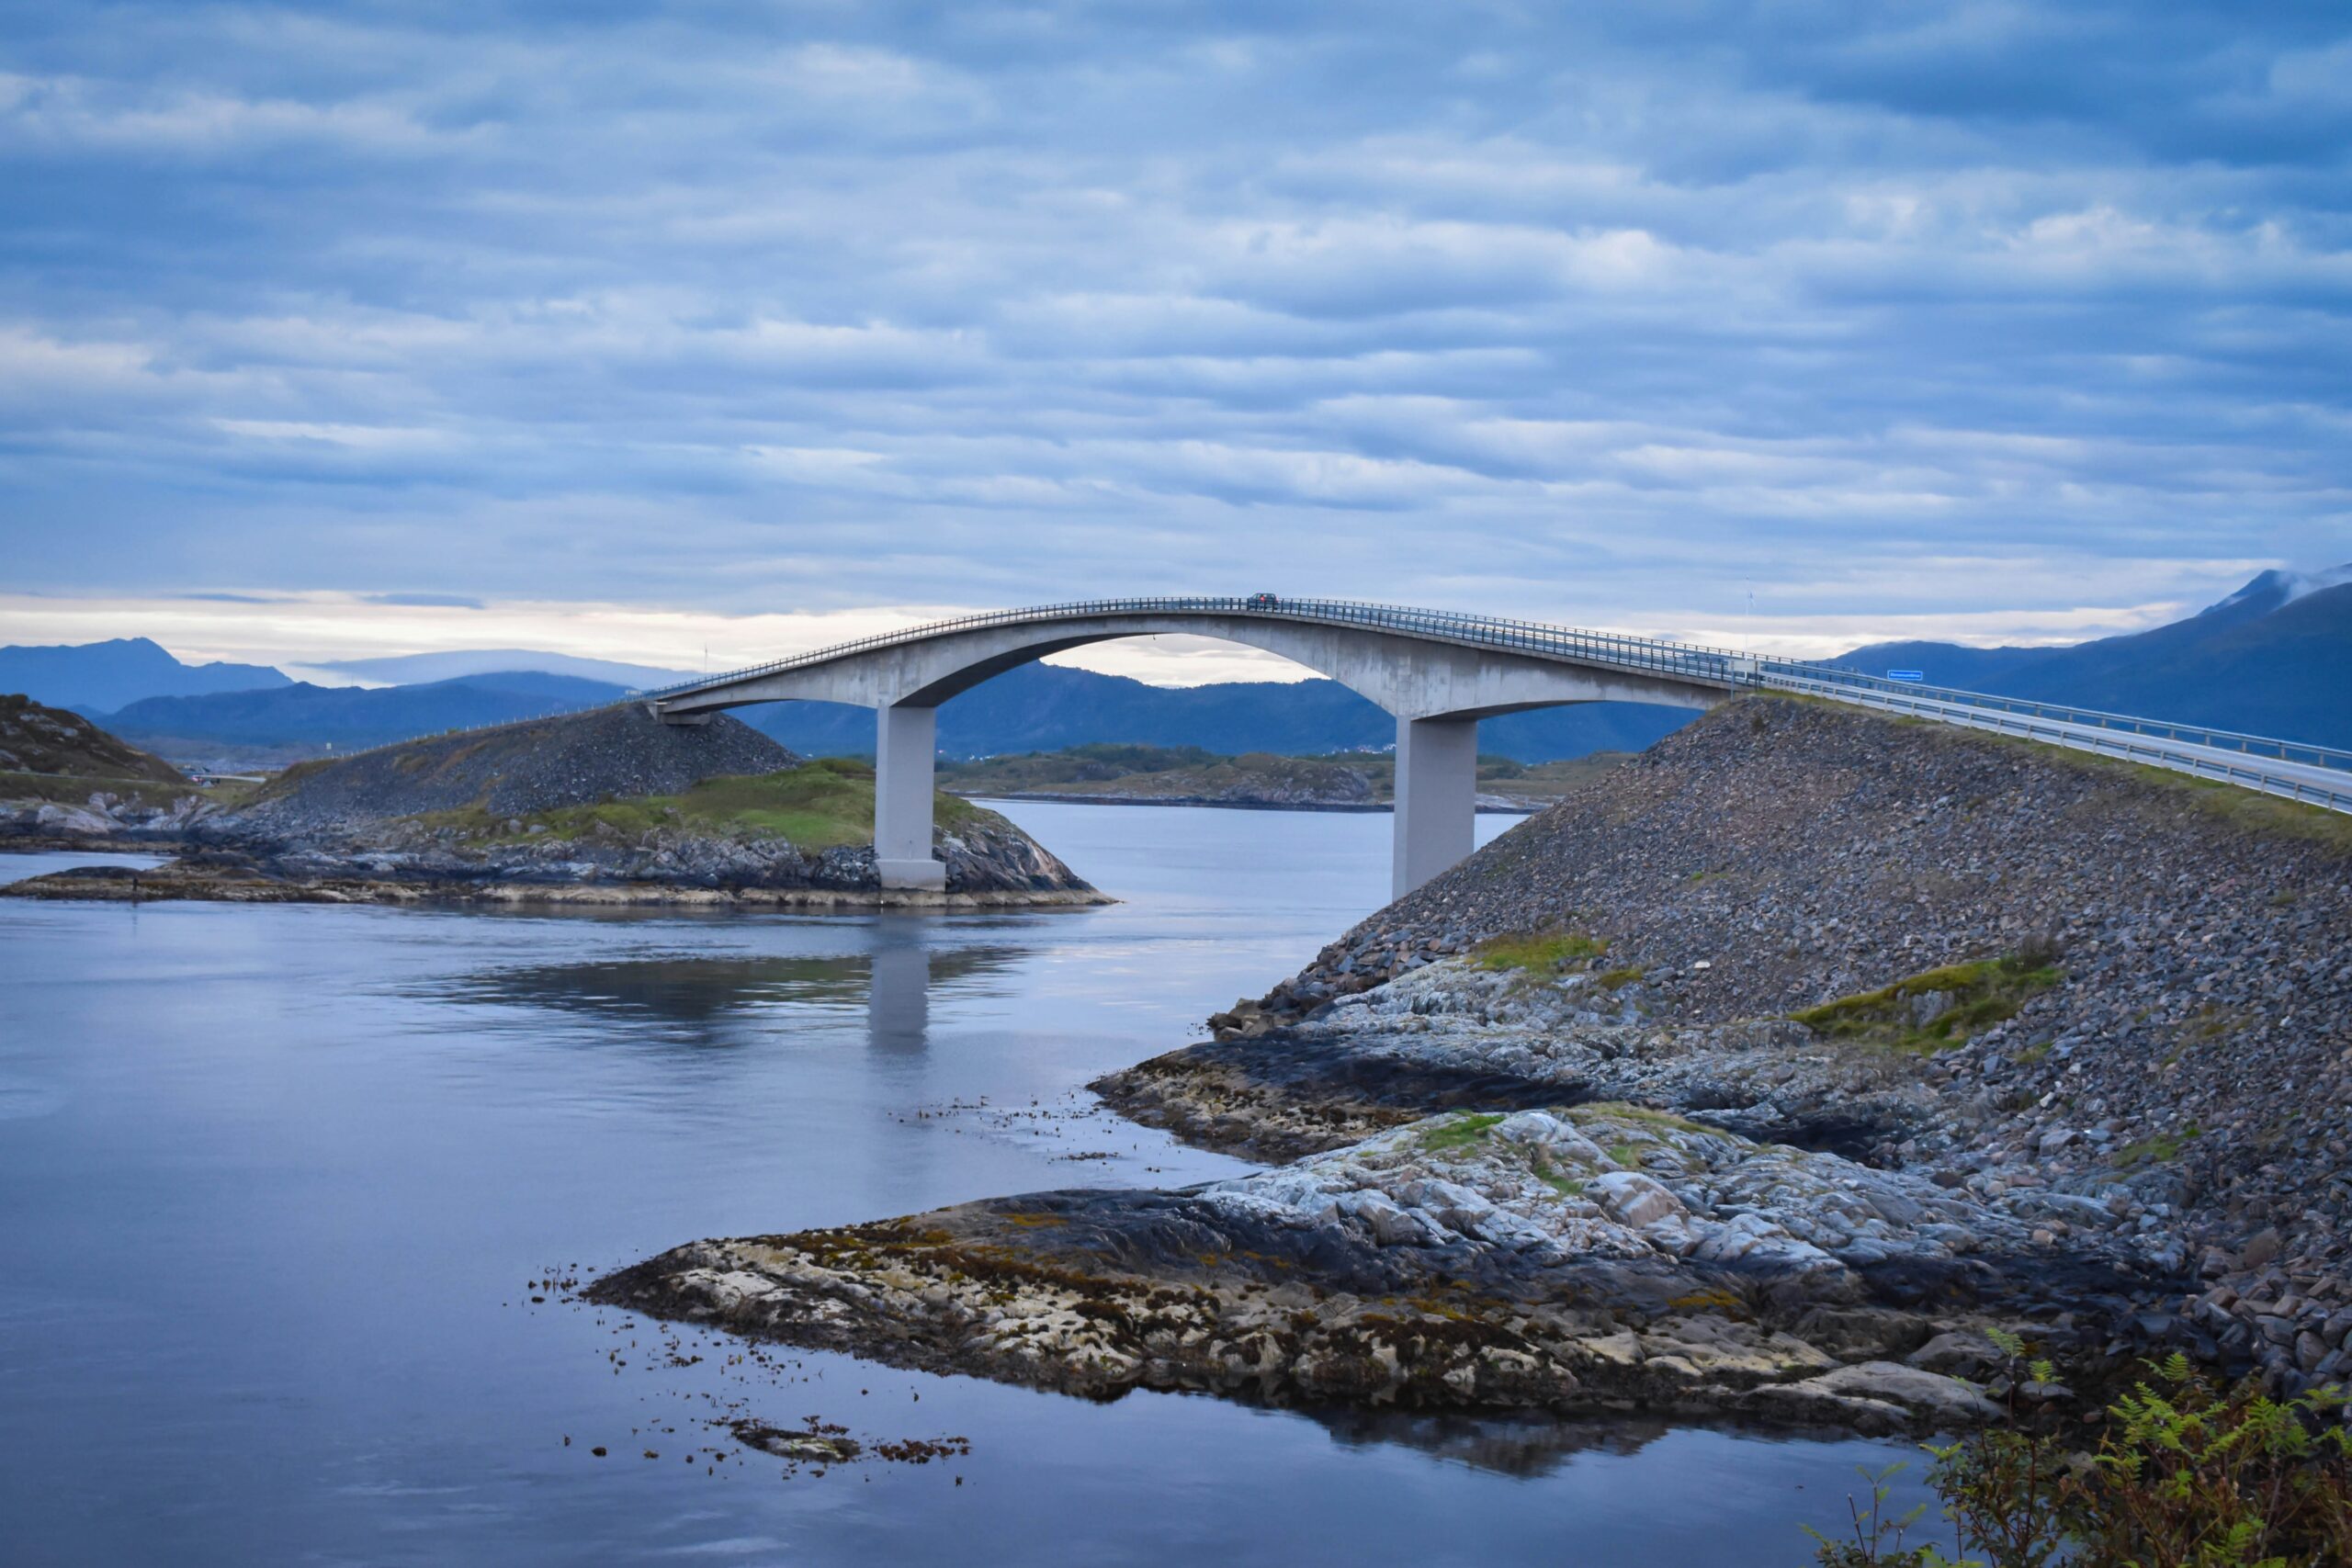 The image is a landscape shot of the bridge in Atlanterhavsvegen on the west coast of Norway. The bridge crosses a stretch of water and the land is bare and arctic. The sky is cloudy and grey.